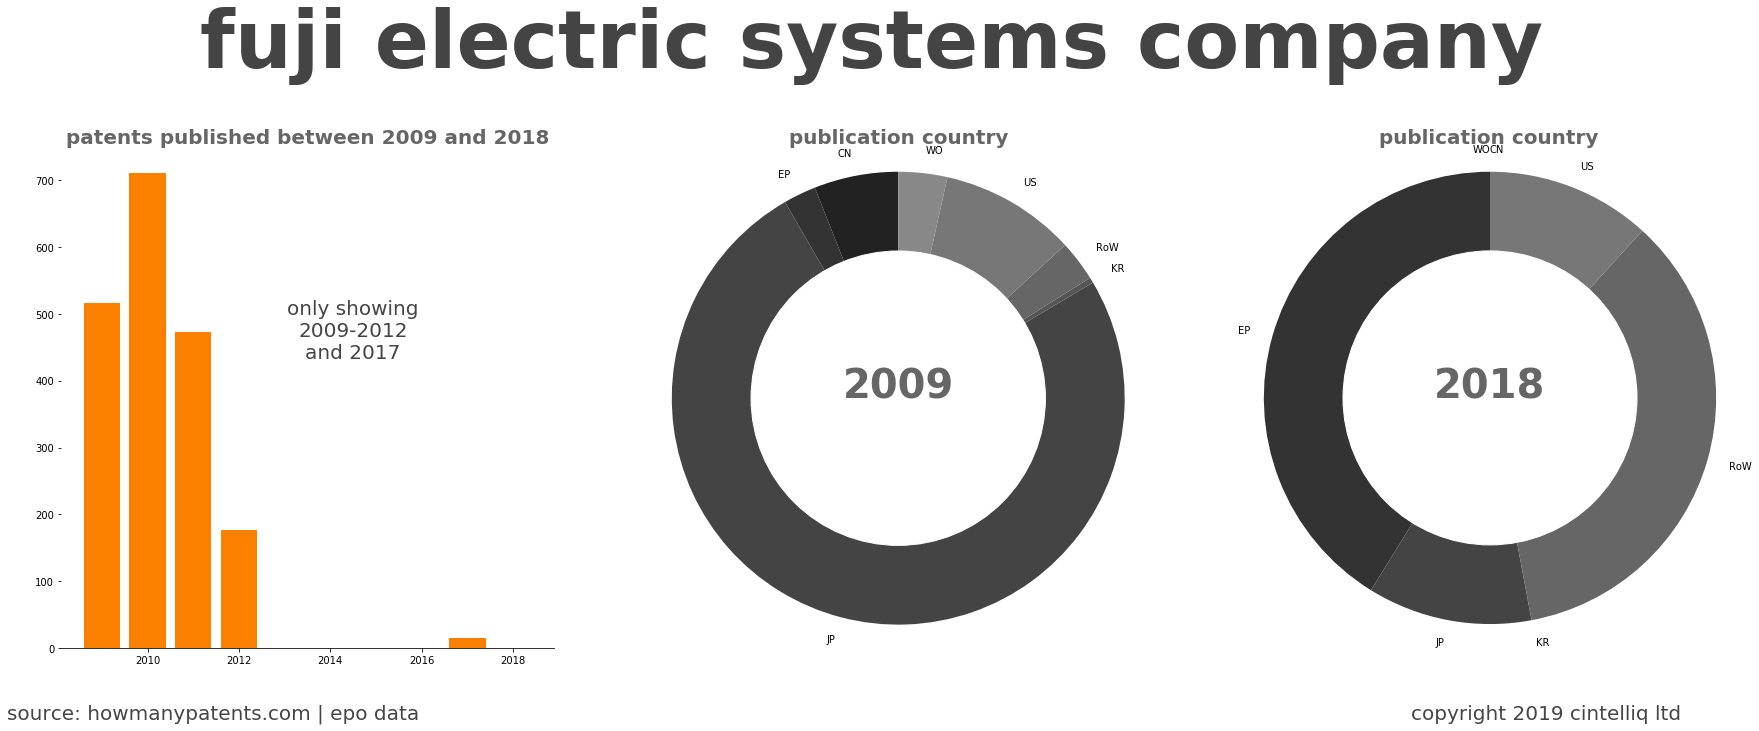 summary of patents for Fuji Electric Systems Company